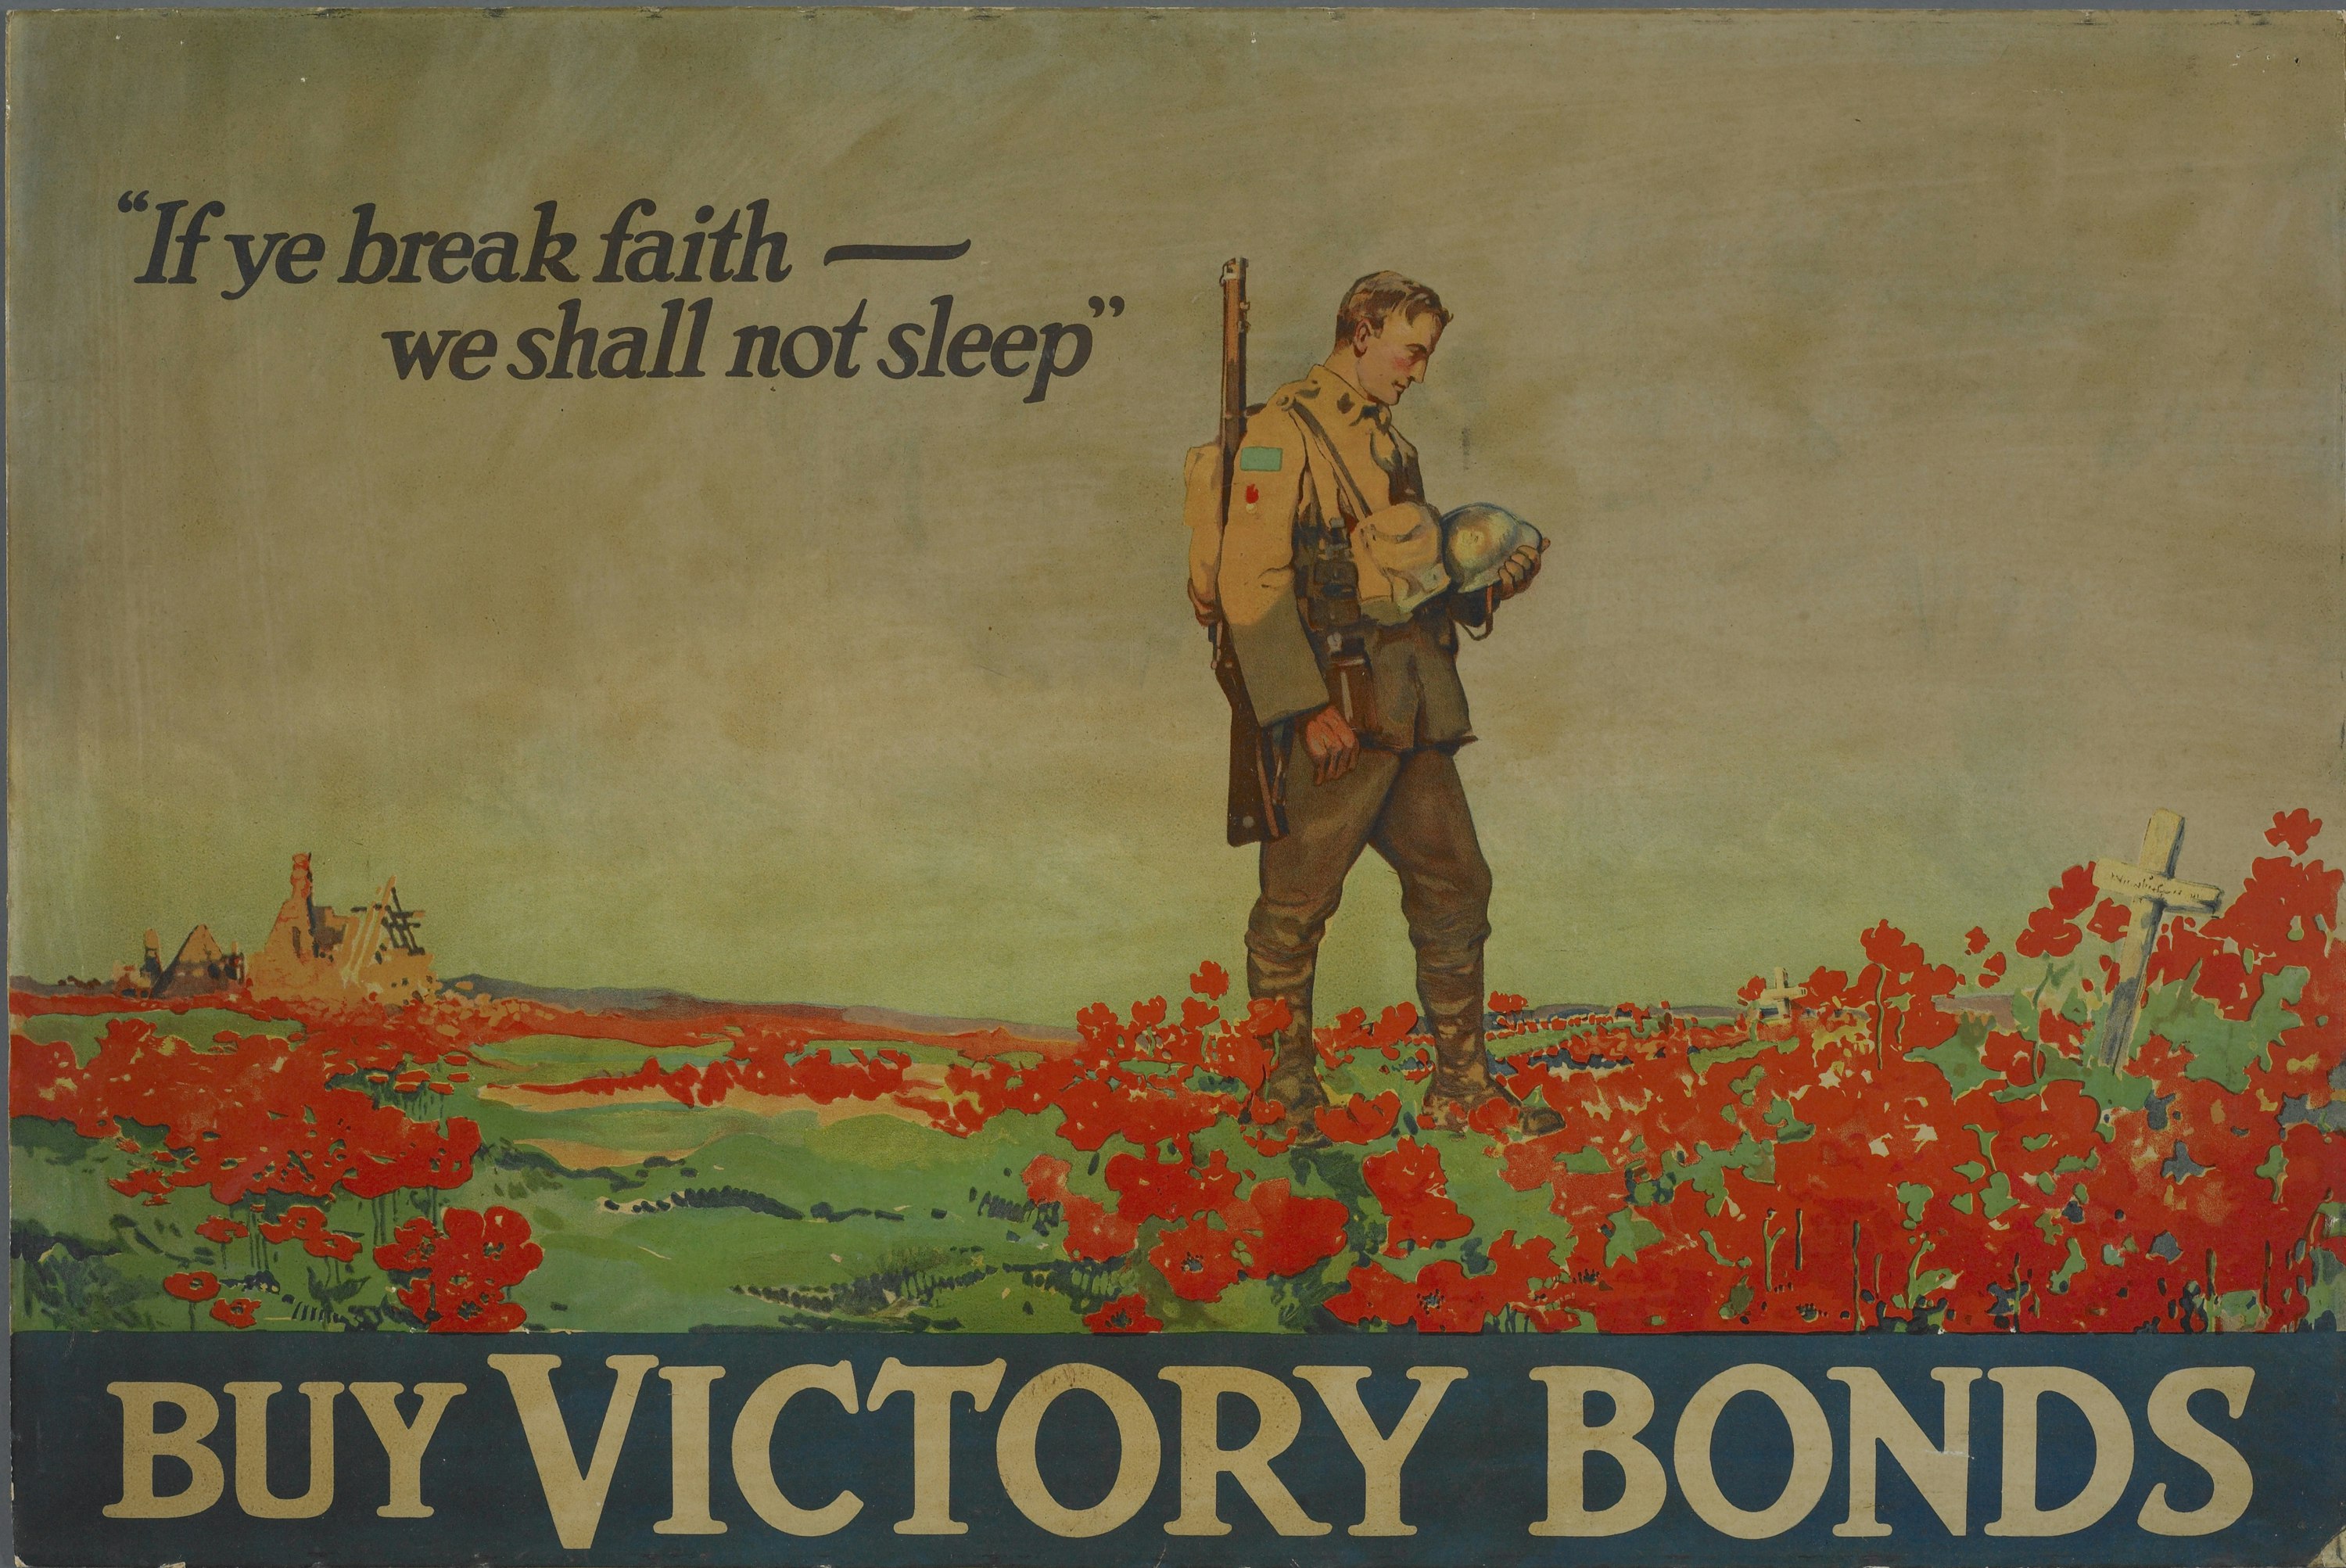 Poster of a man in an army uniform standing in a field of poppies with the words  "If ye break faith - we shall not sleep